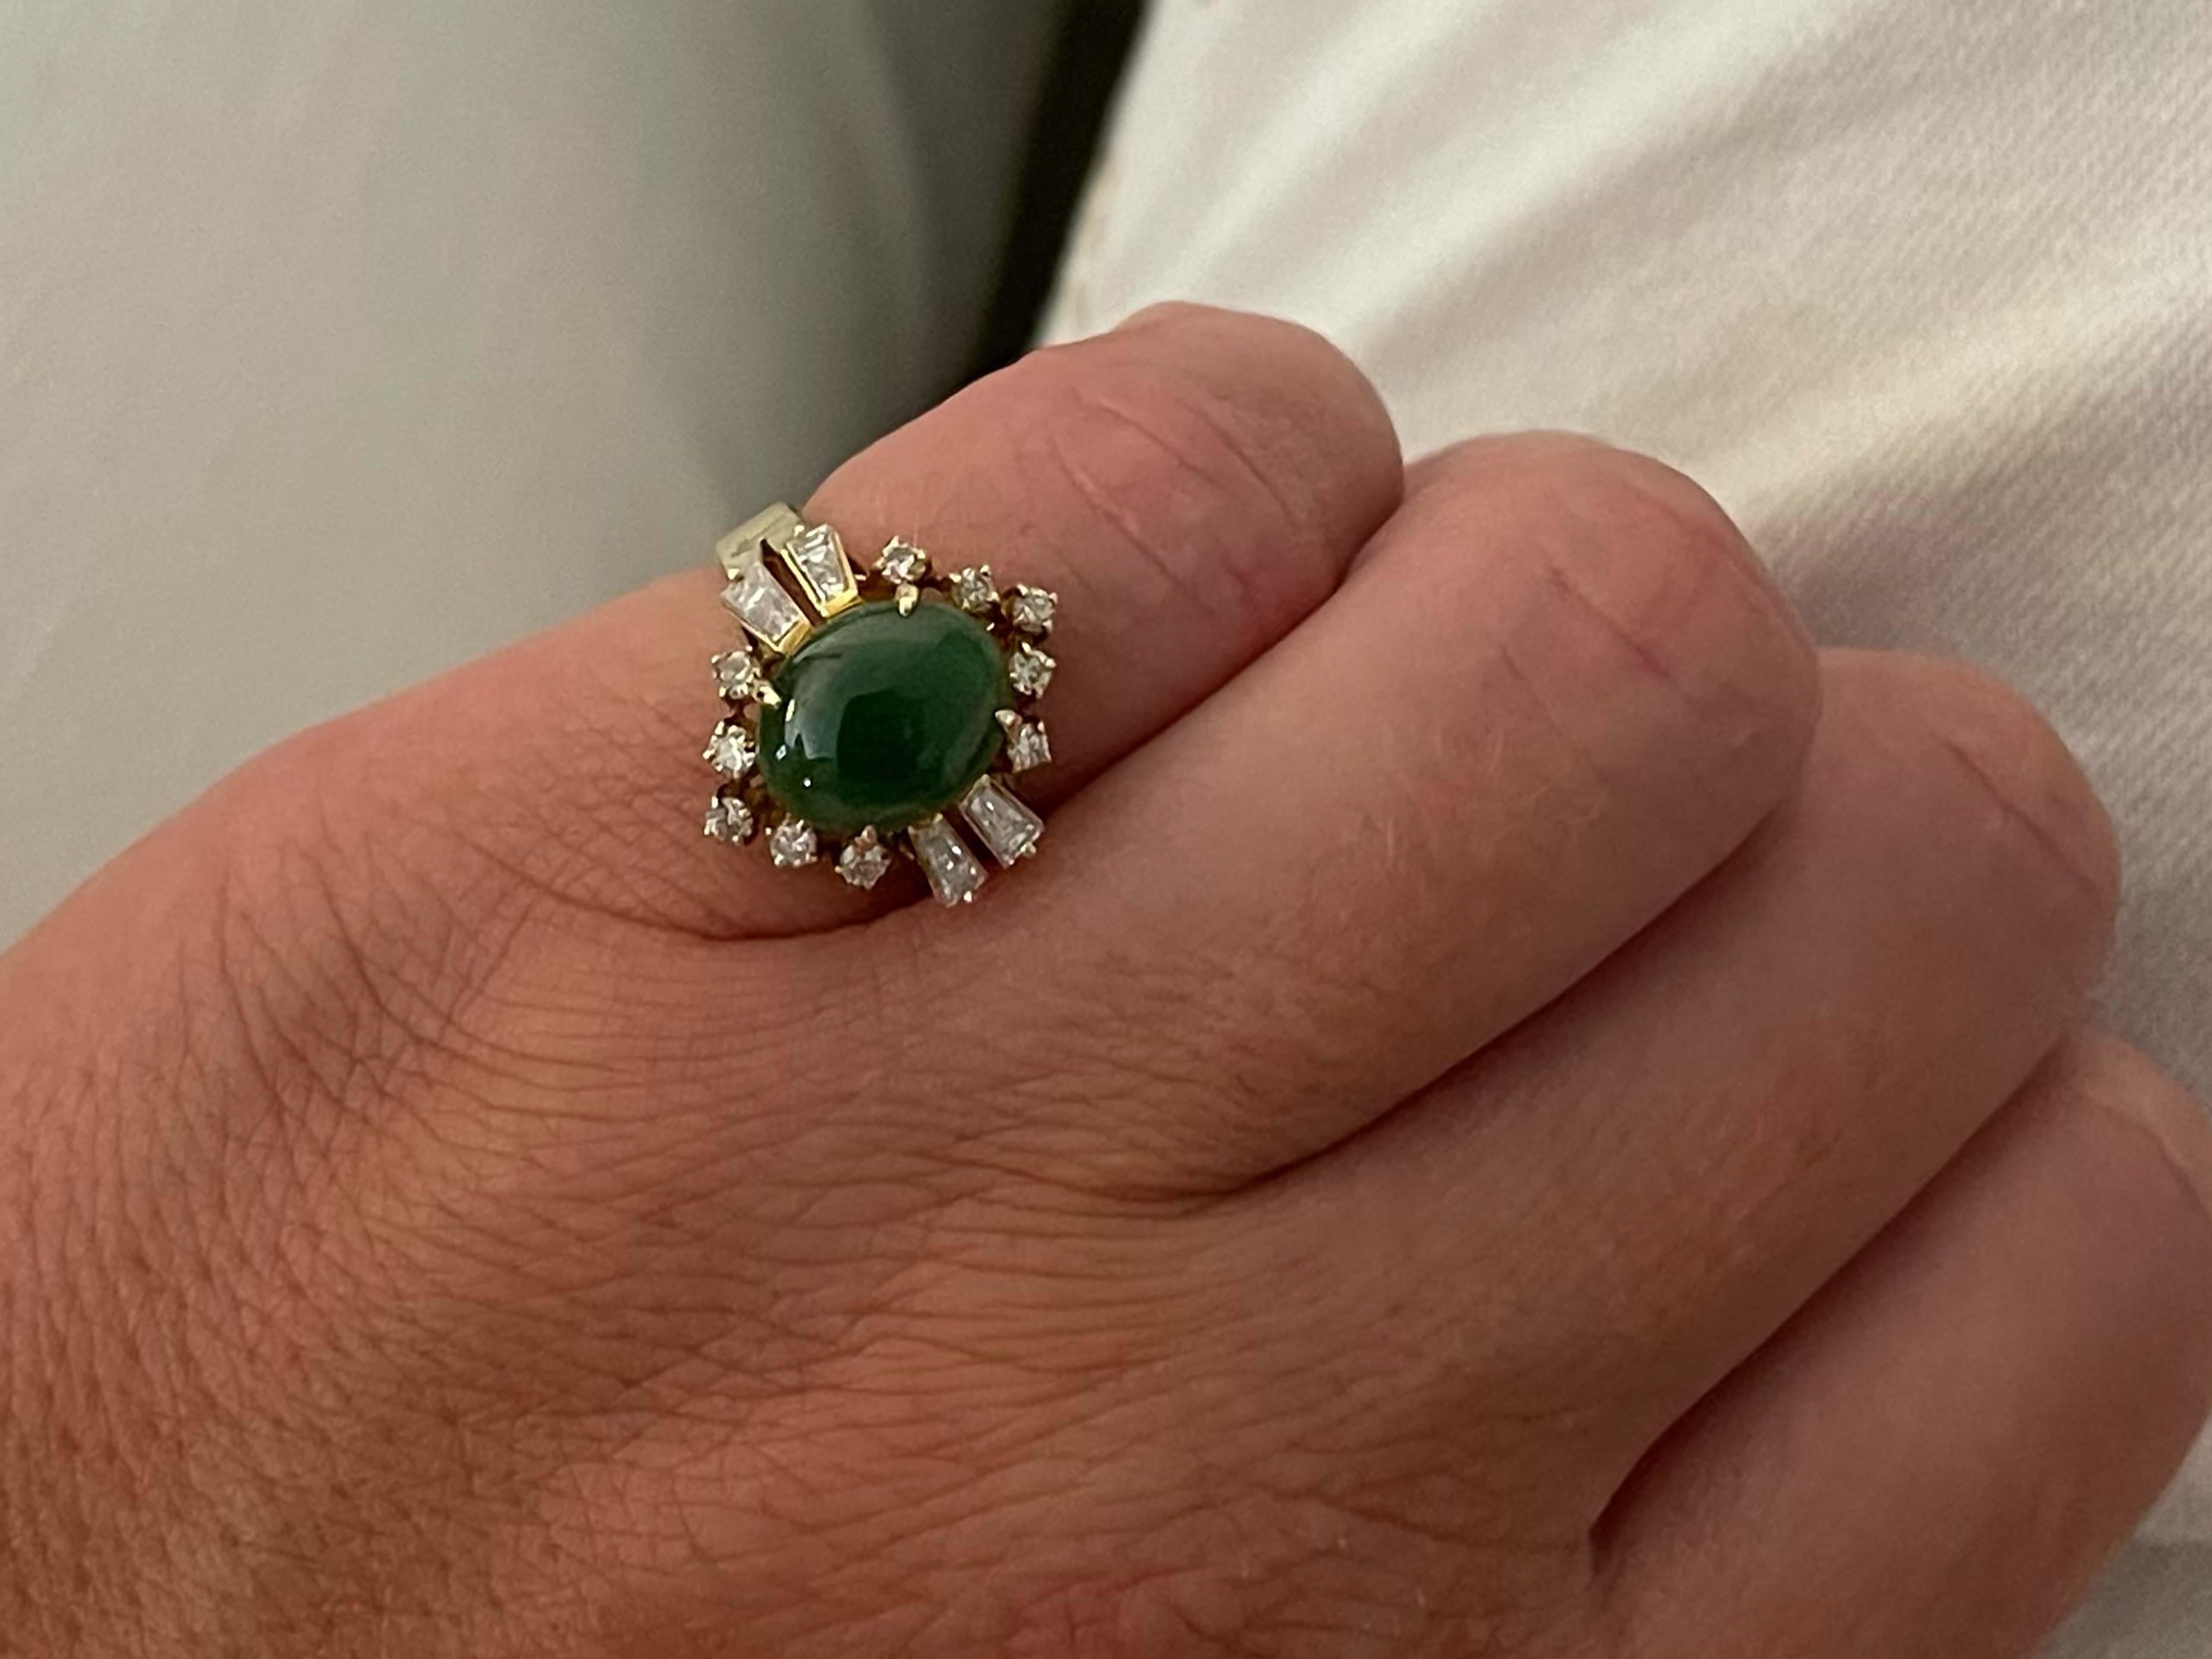 Item Specifications:

Metal: 14K Yellow Gold 

Style: Statement Ring

Ring Size: 4.25 (resizing available for a fee)

Total Weight: 4.1 Grams

Gemstone Specifications:

Center Gemstone: Jadeite Jade

Shape: Oval

Color: Green

Cut: Cabochon 

Jade